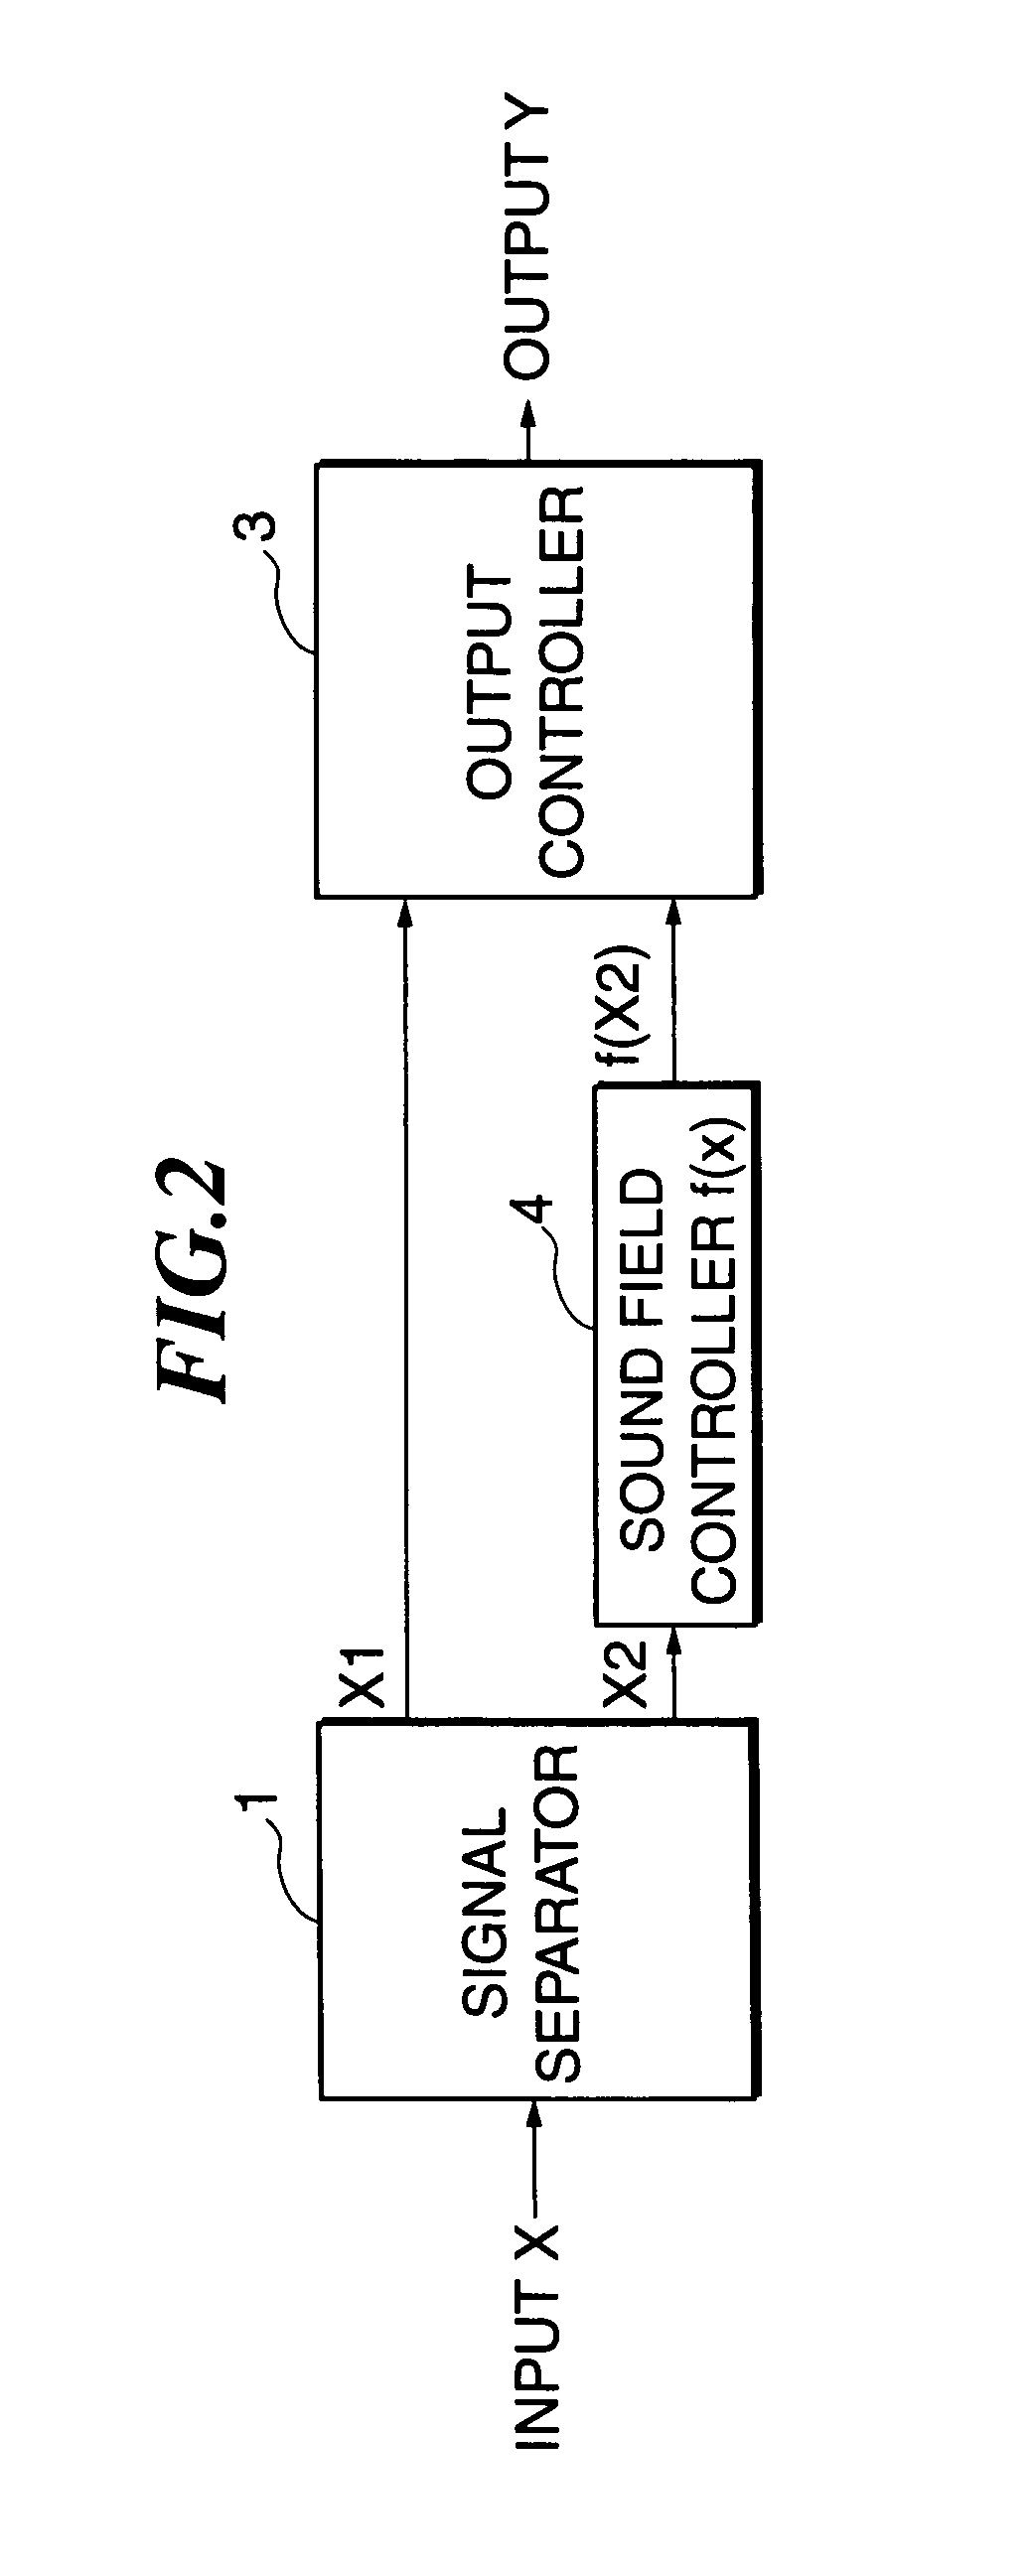 Sound processing method and apparatus